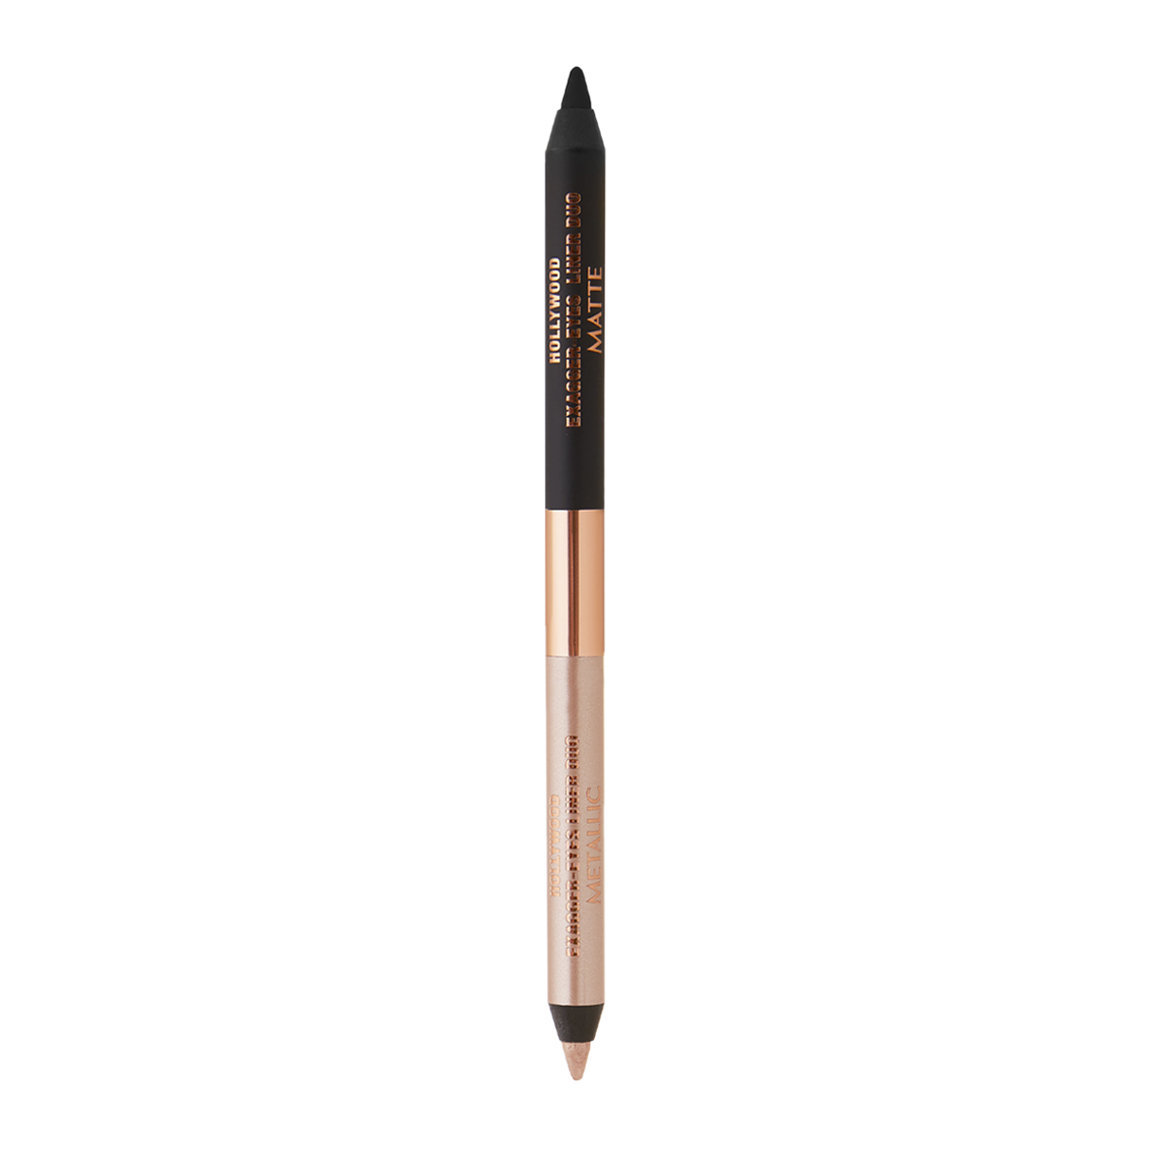 Charlotte Tilbury Hollywood Exagger-Eyes Matte & Metallic Double Ended Eyeliner alternative view 1 - product swatch.